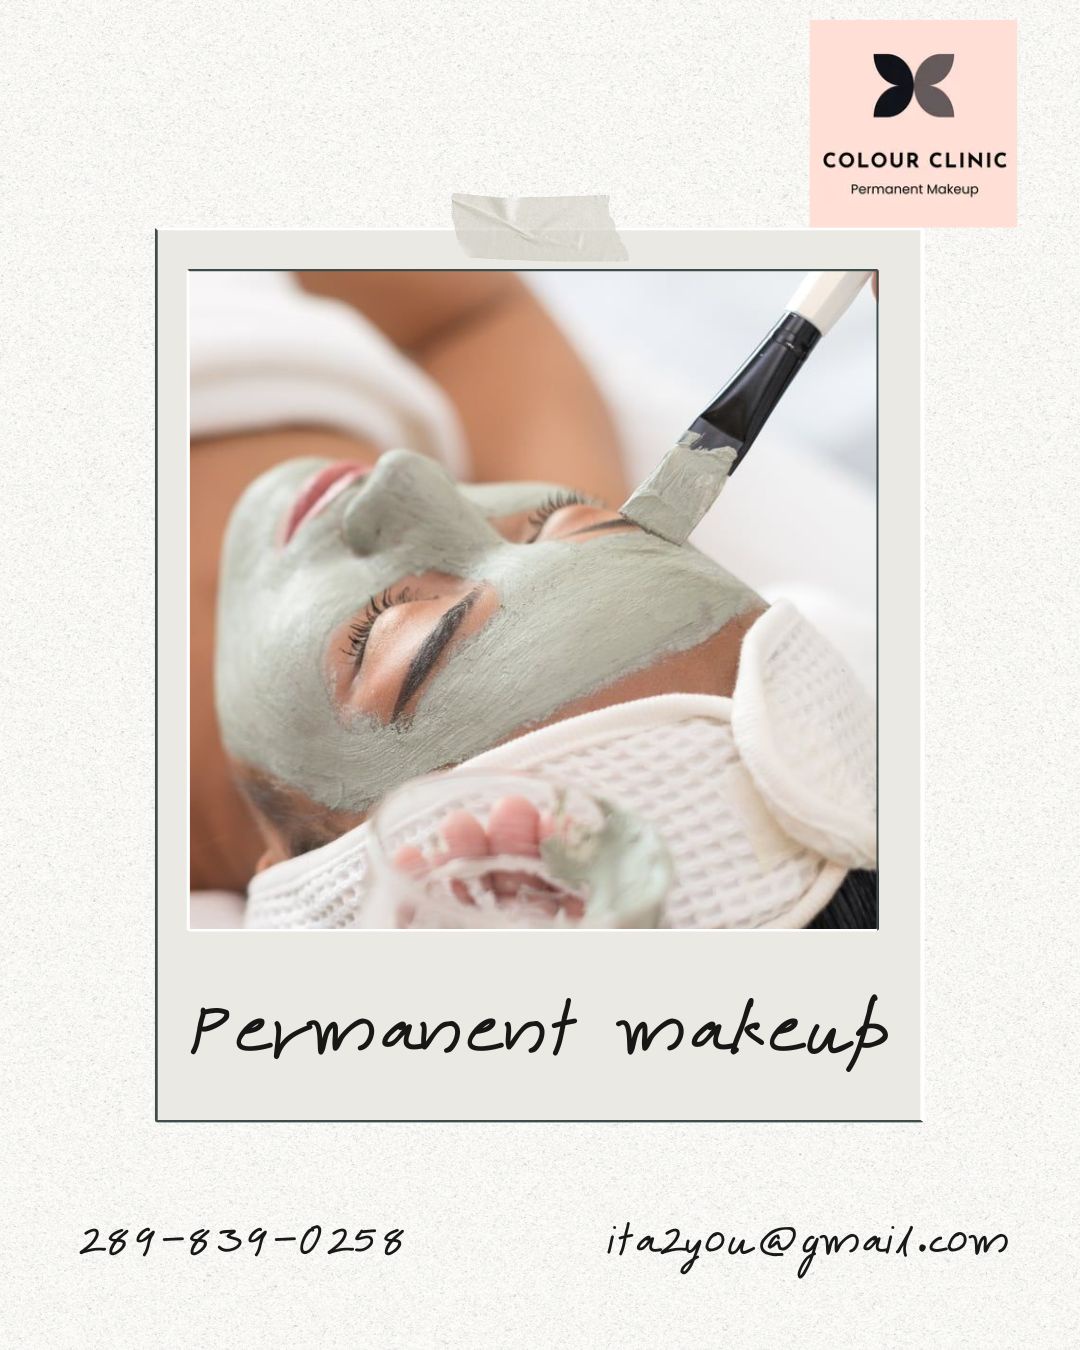 Enhance Your Natural Beauty with Permanent Makeup at Colour Clinic